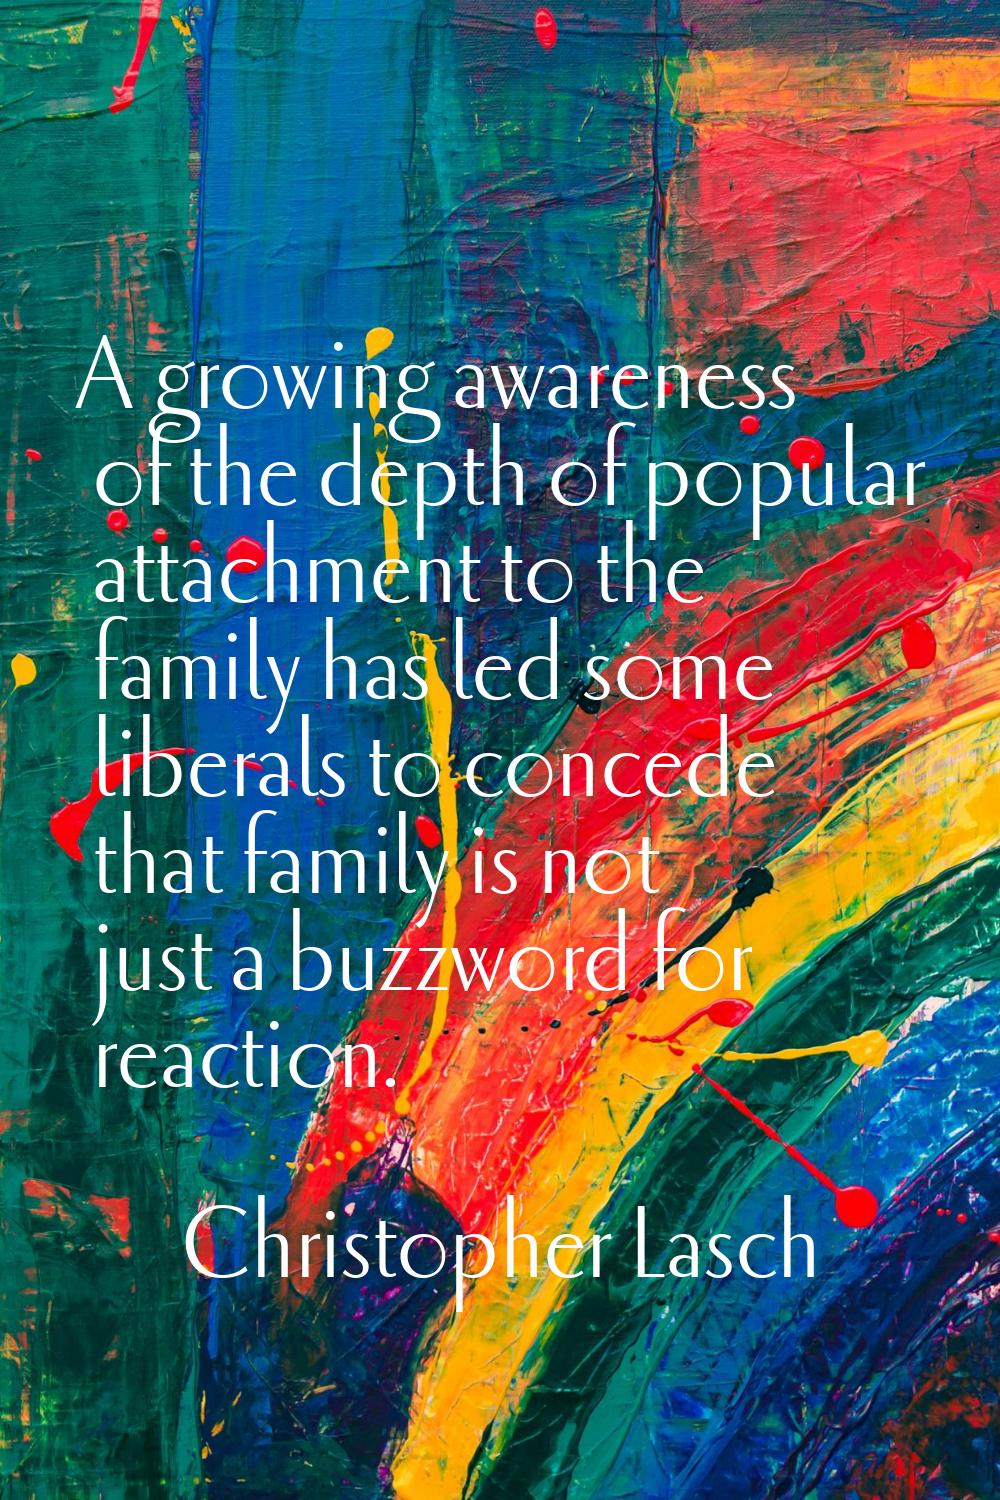 A growing awareness of the depth of popular attachment to the family has led some liberals to conce